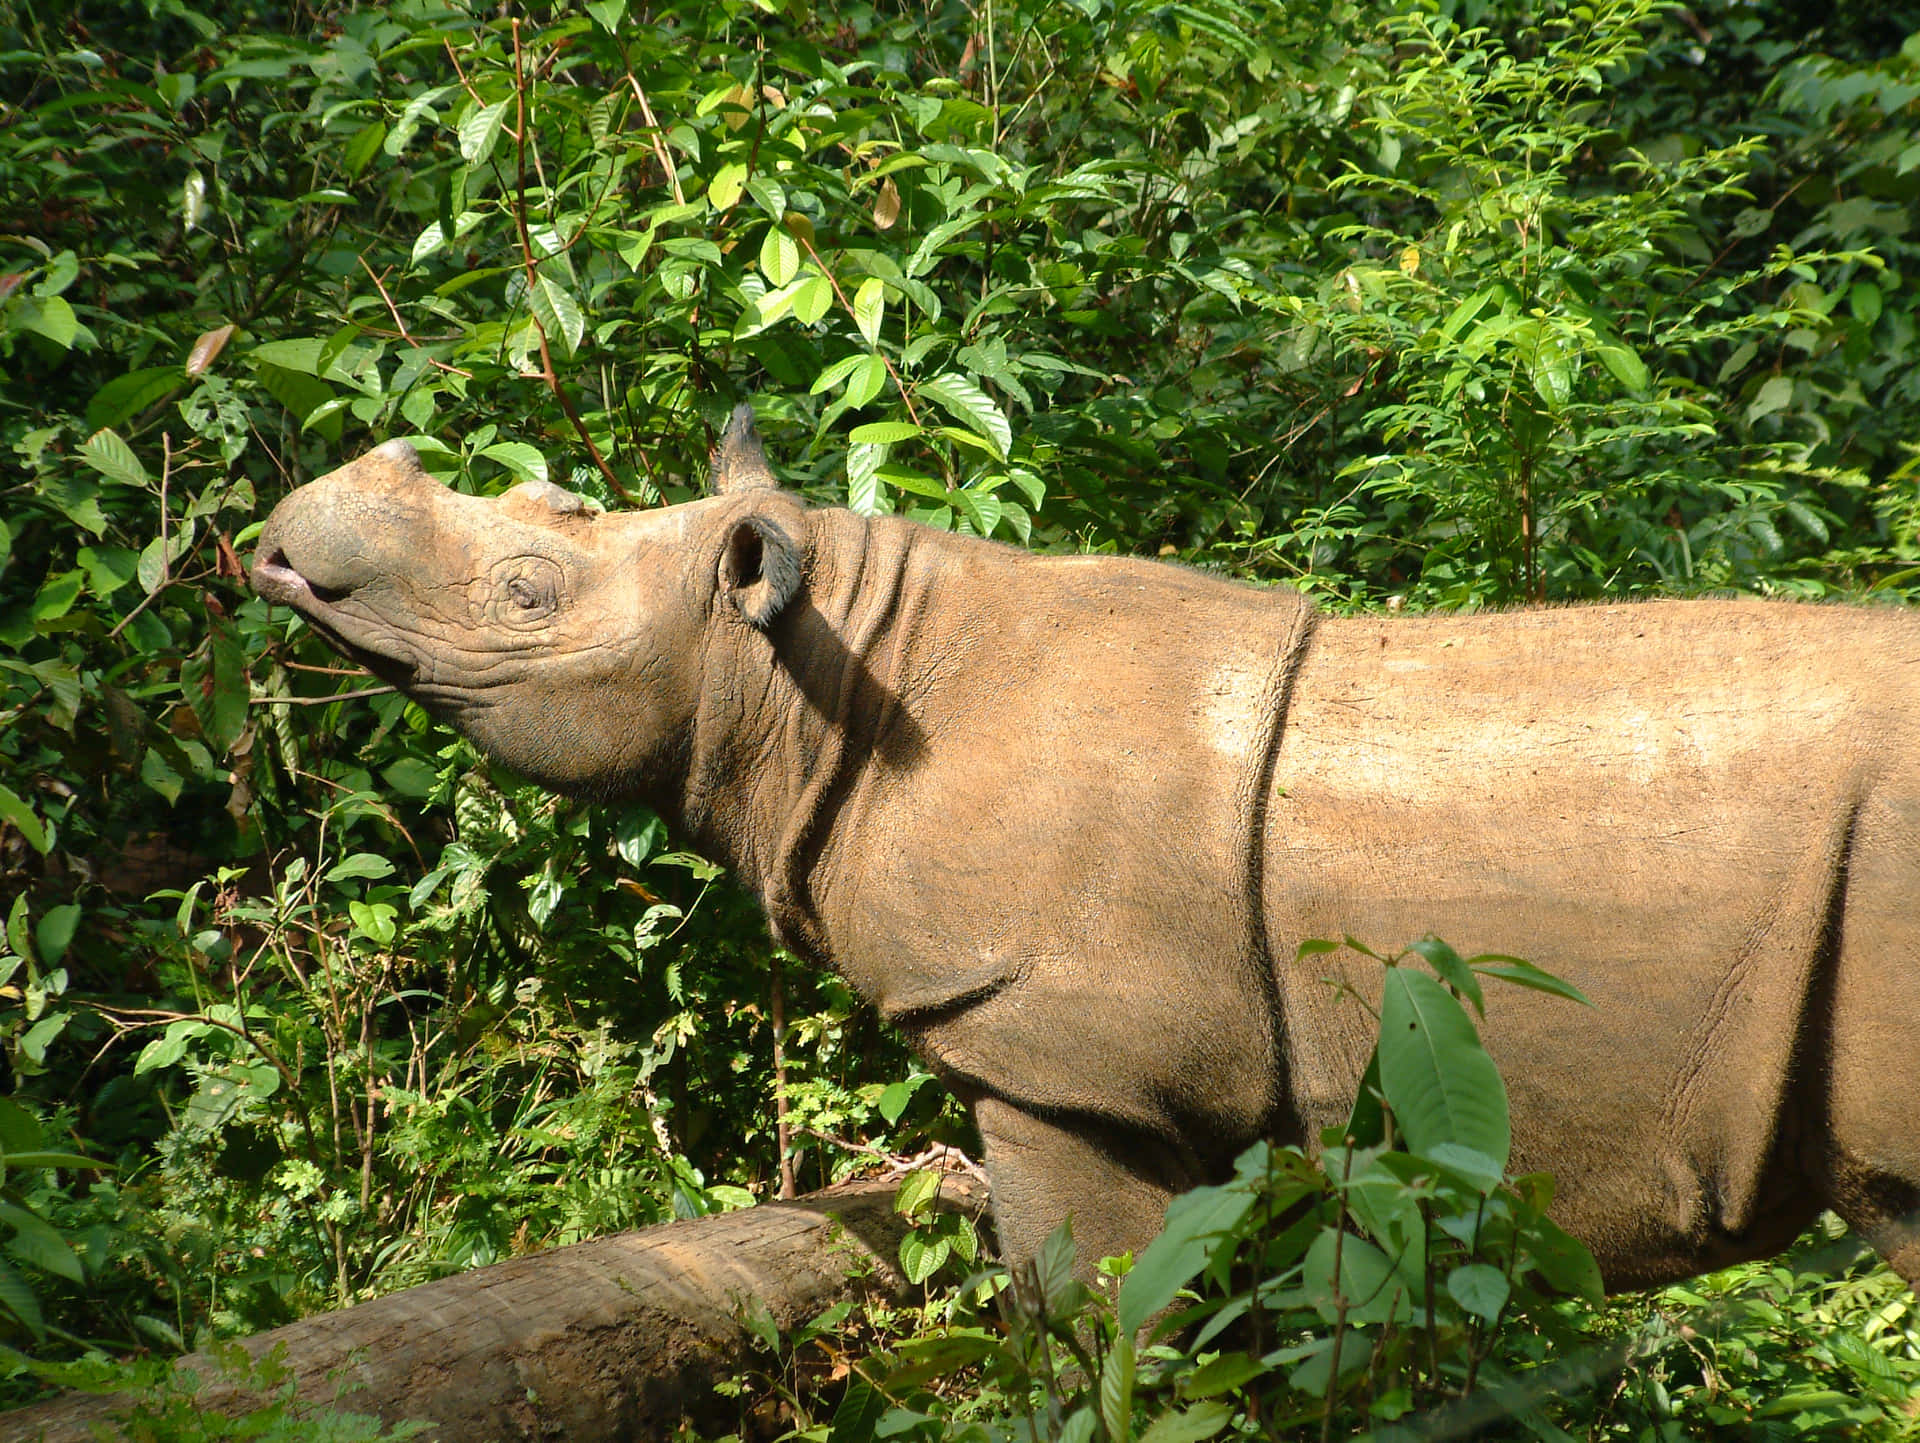 An Indian rhinoceros stands in the grasslands of Kaziranga National Park